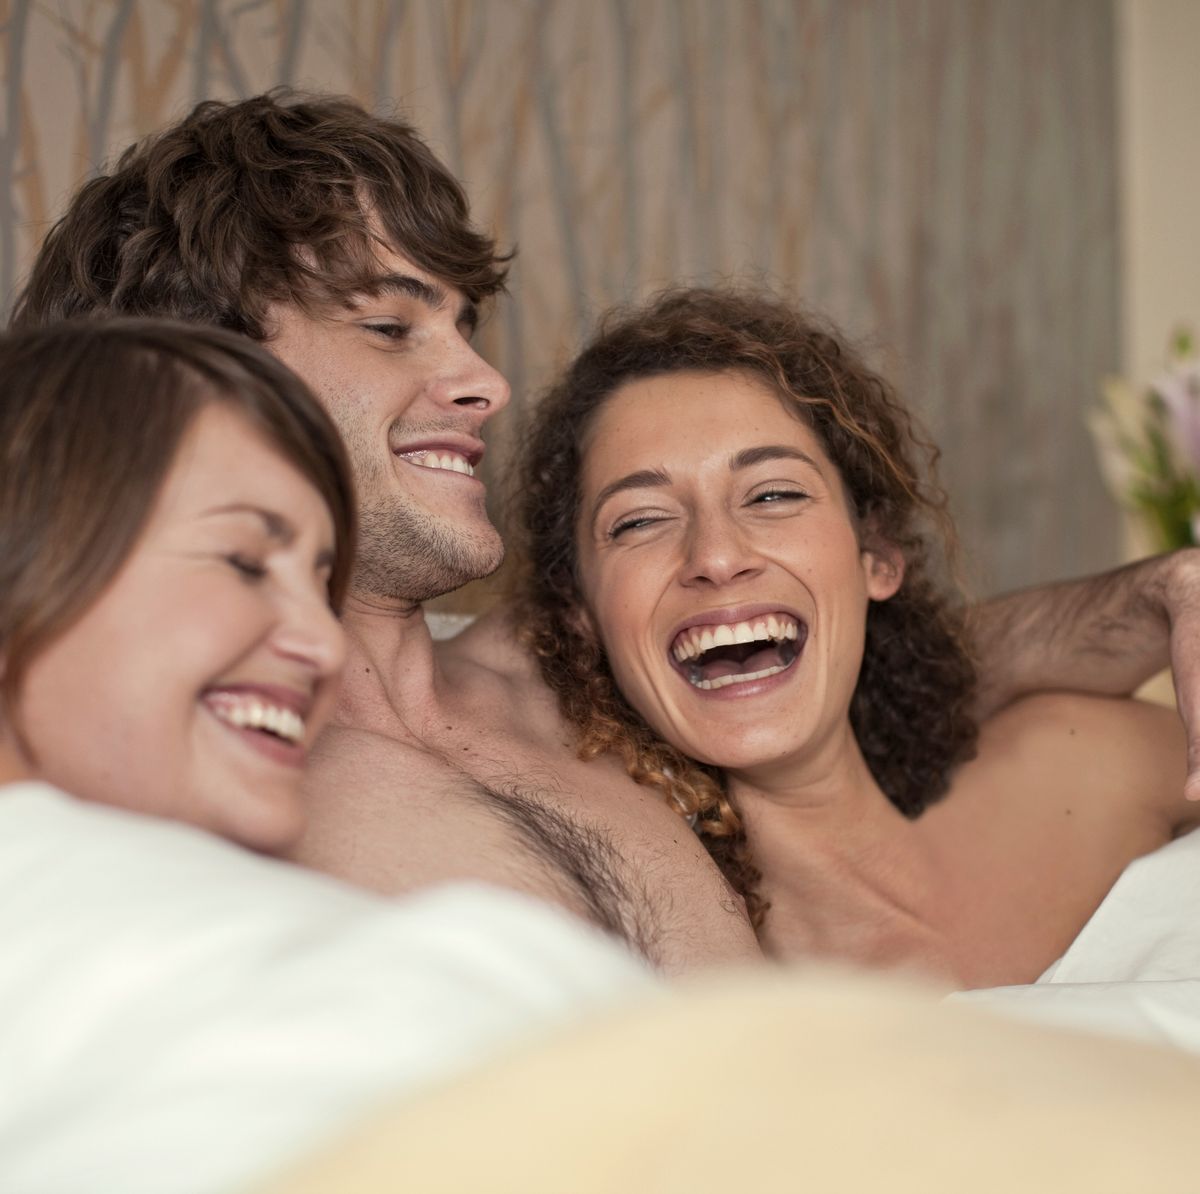 Ffm Threesome Positions Chart - 10 Threesome Sex Positions That Are Super Hot and Totally Doable